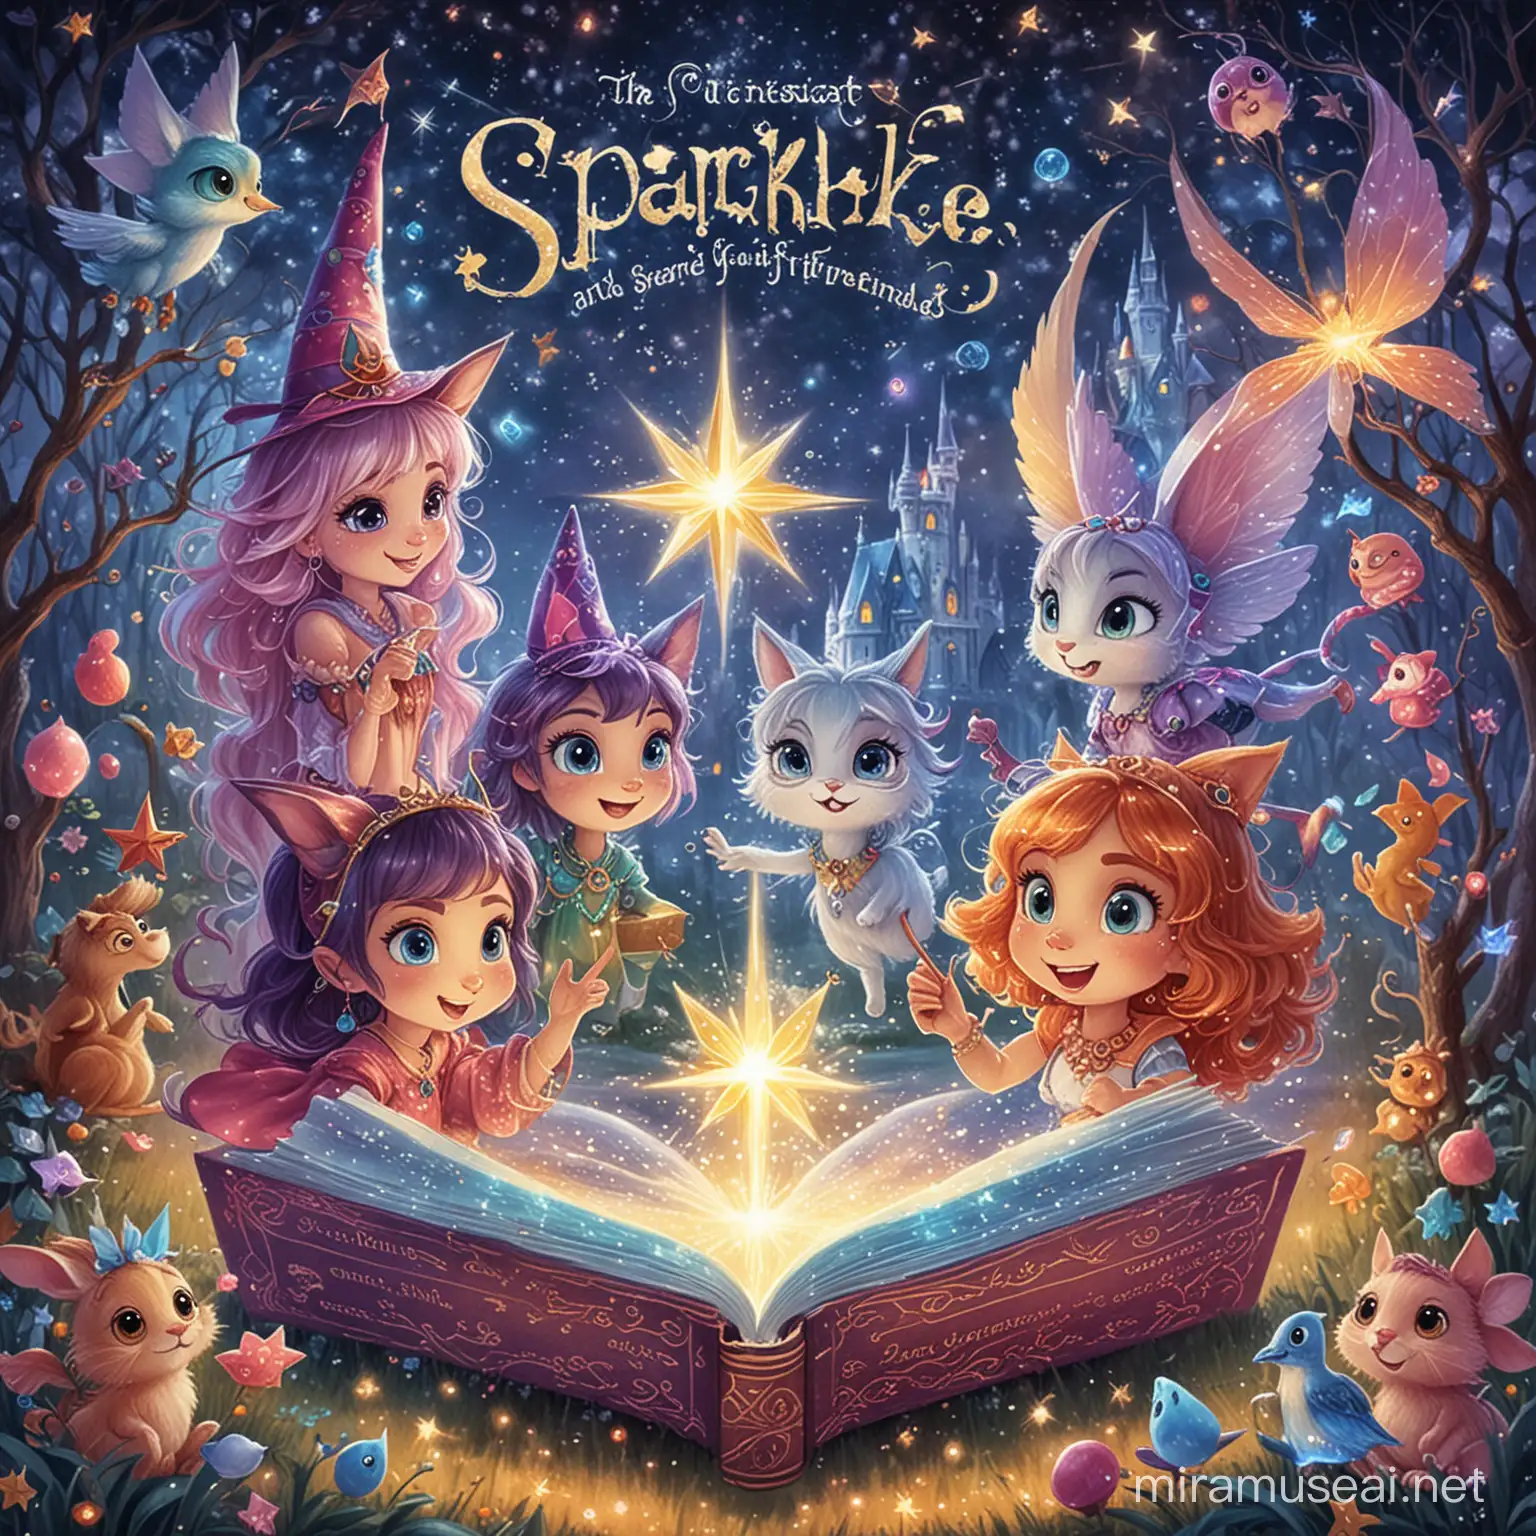 Generate ulustrate  book cover 8,5 x 8,5 cm

Title: “The Magical Adventures of Sparkle and Friends”
Author Yvan Baya
